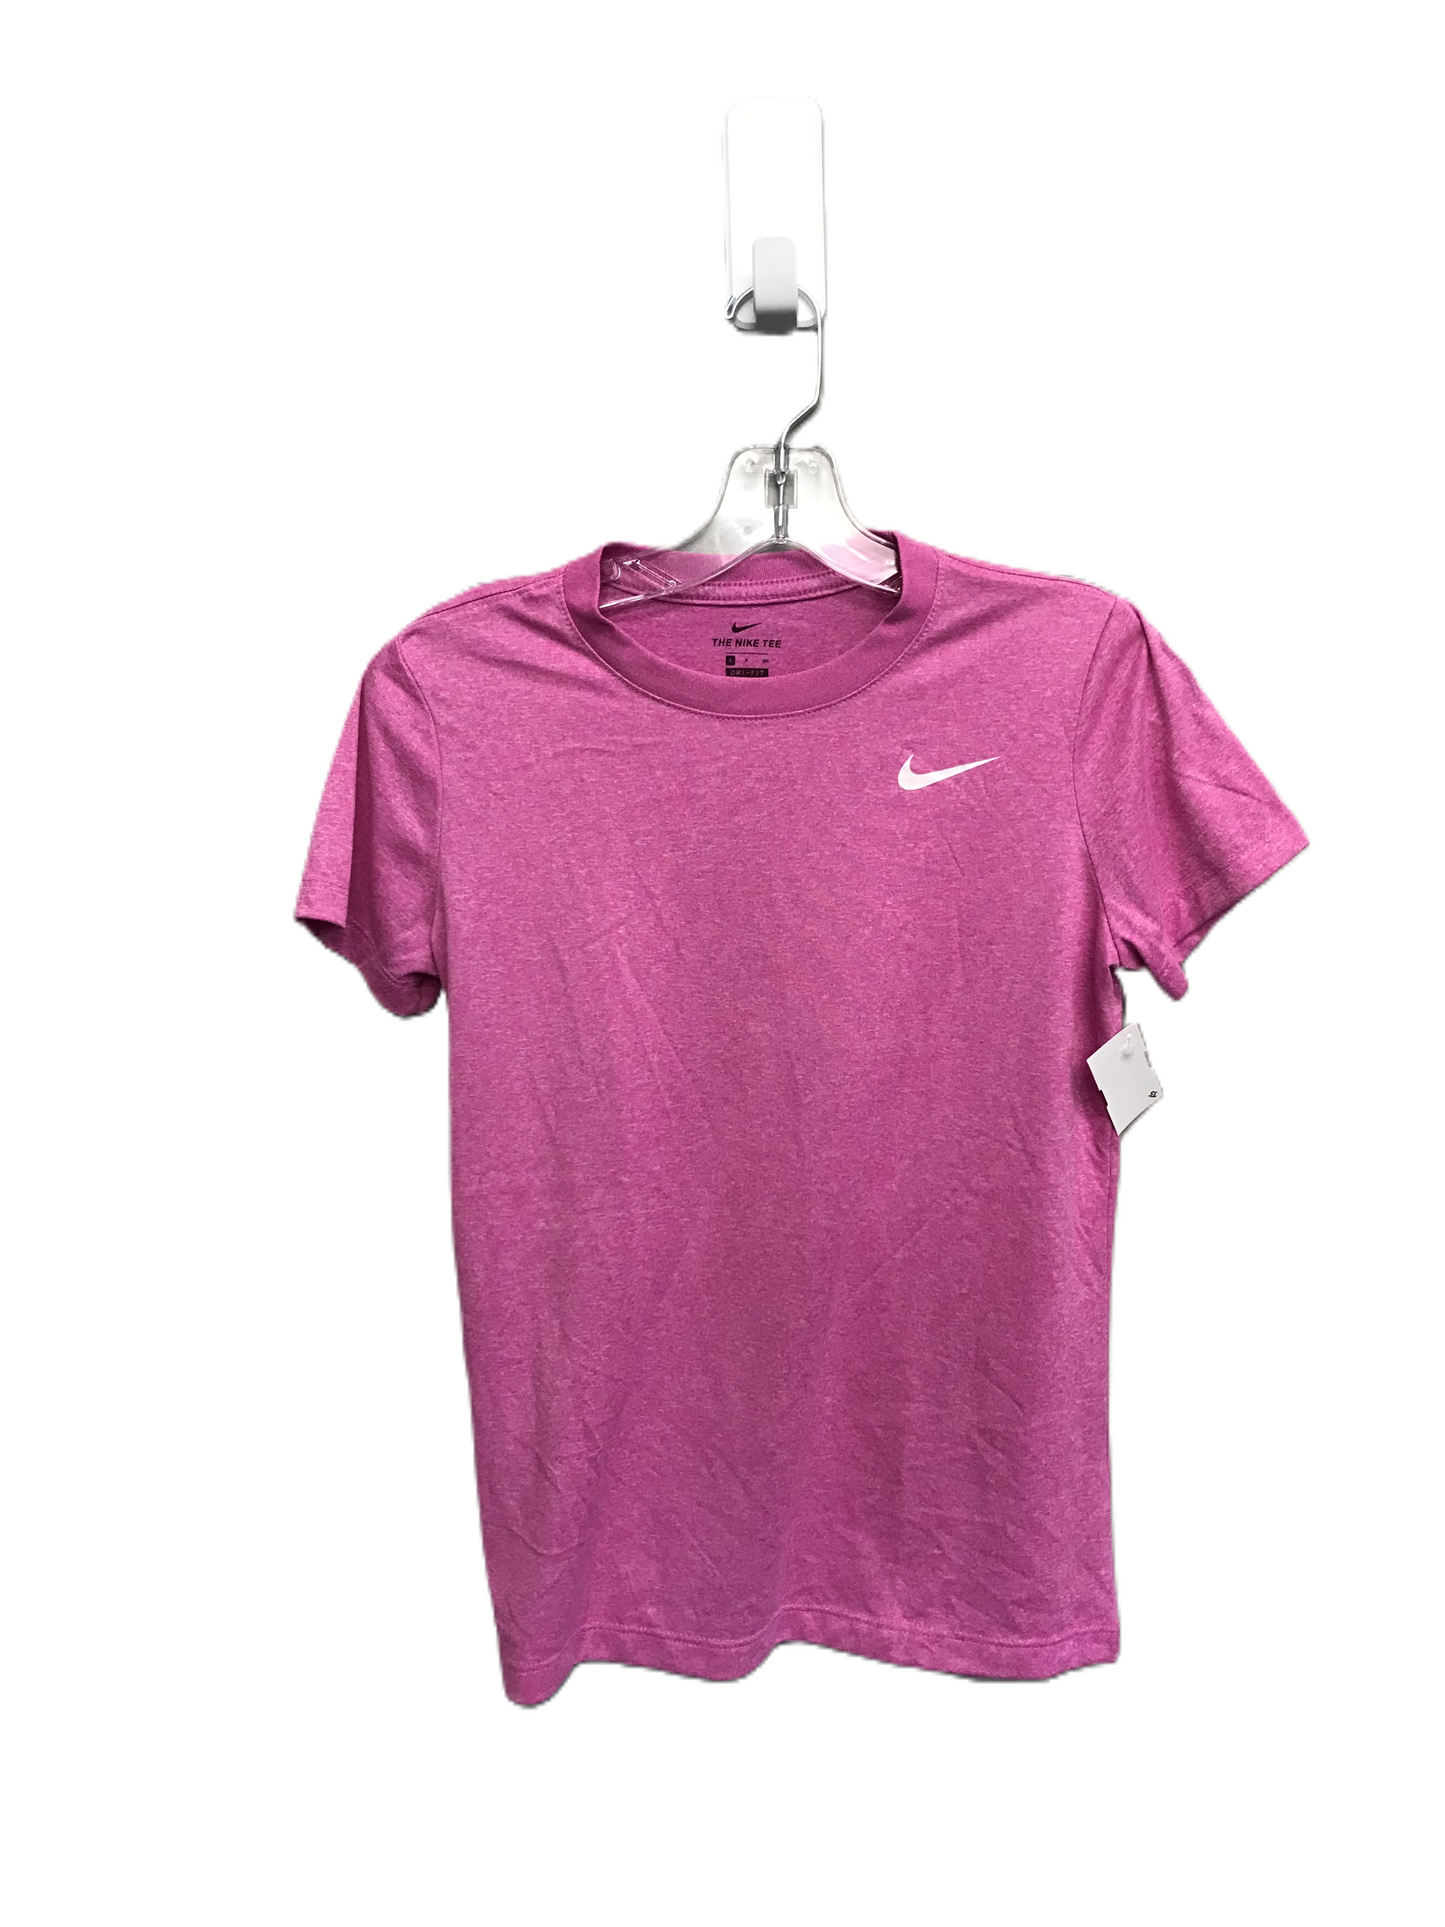 Animal Print Athletic Top Short Sleeve By Nike Apparel, Size: S